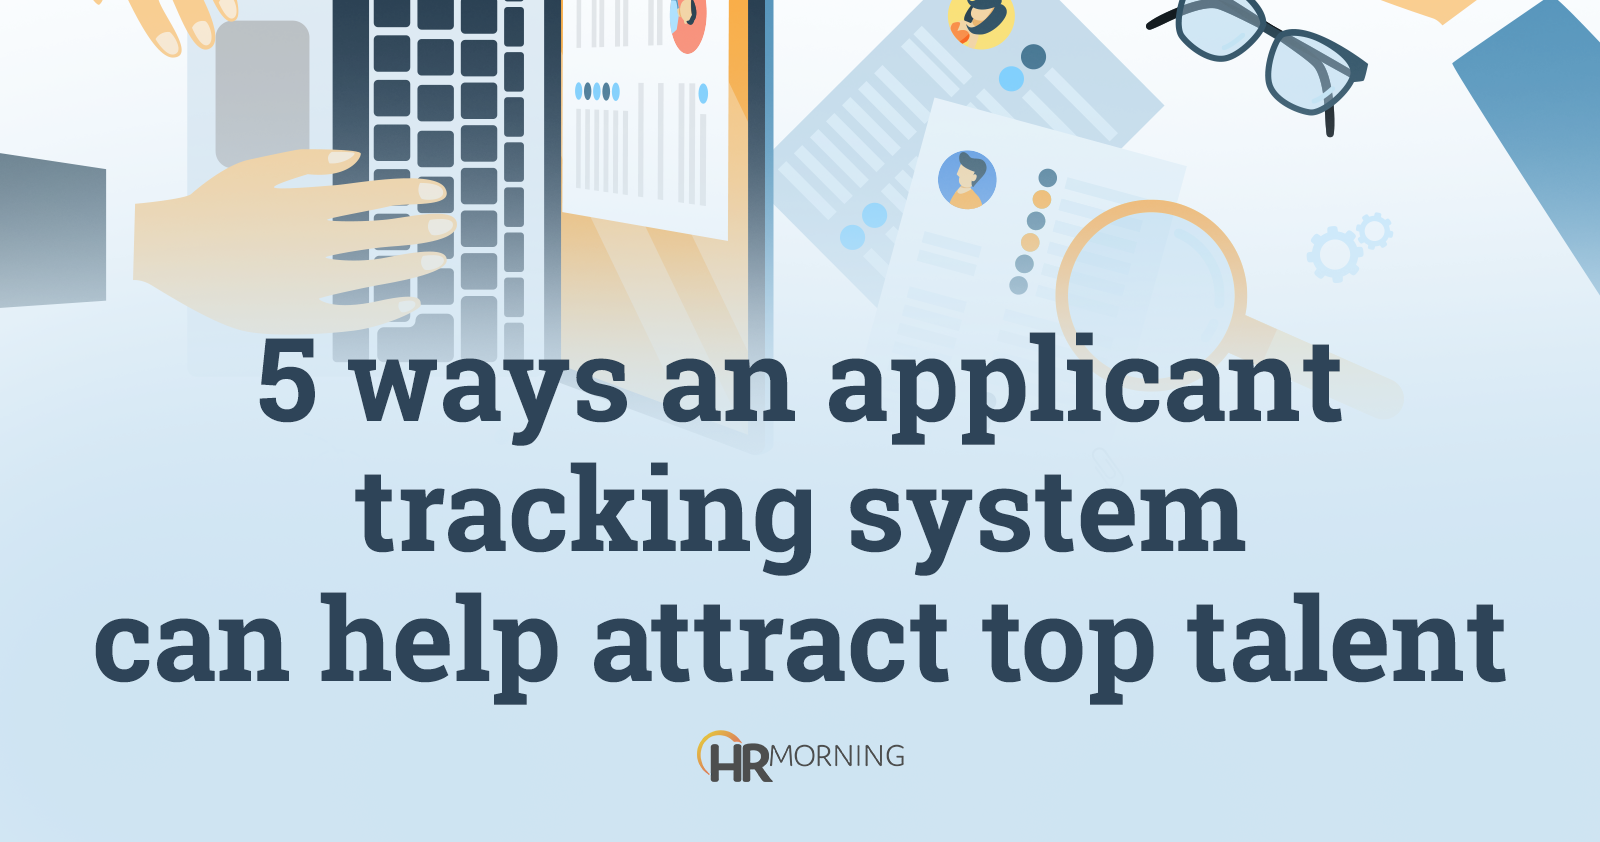 5 ways an applicant tracking system can help attract top talent